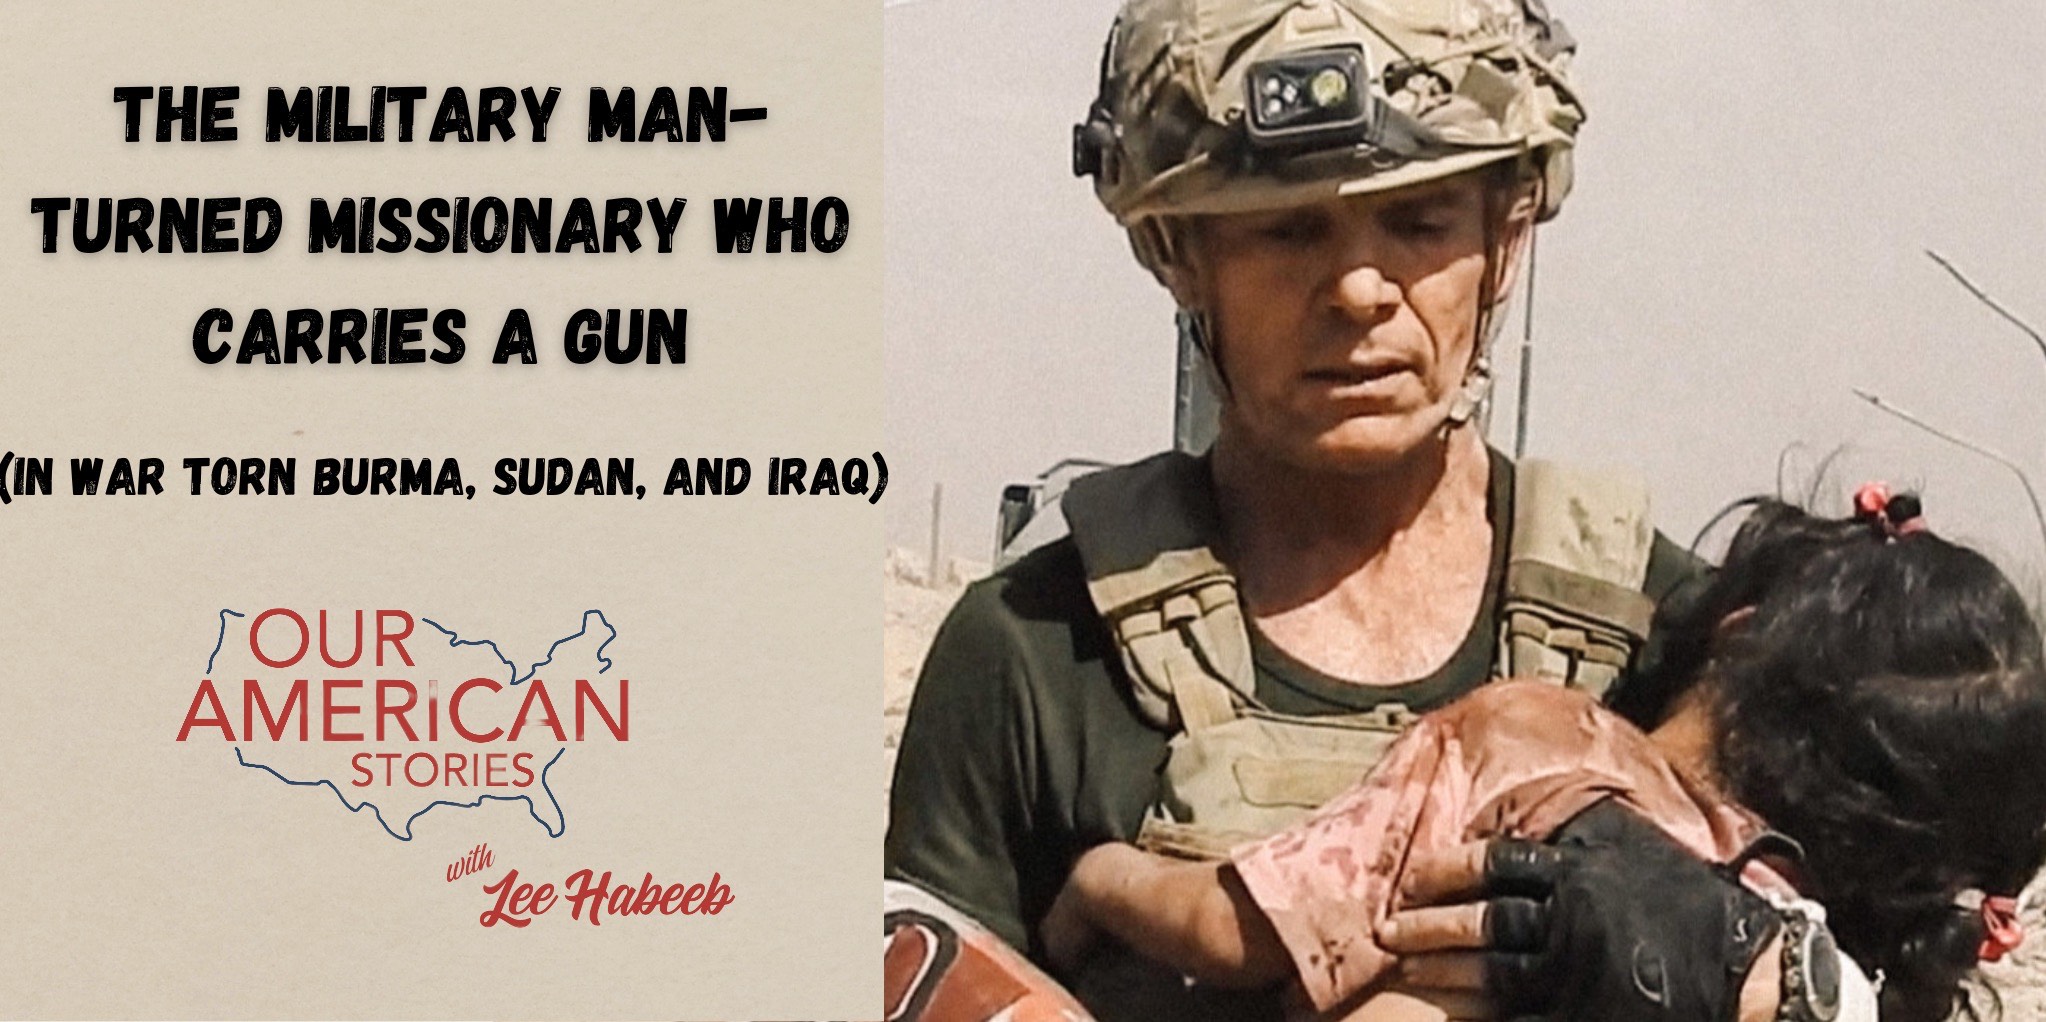 The Story of a Military Man-Turned Missionary Who Carries a Gun... In War-Torn Burma (And Sudan and Iraq)